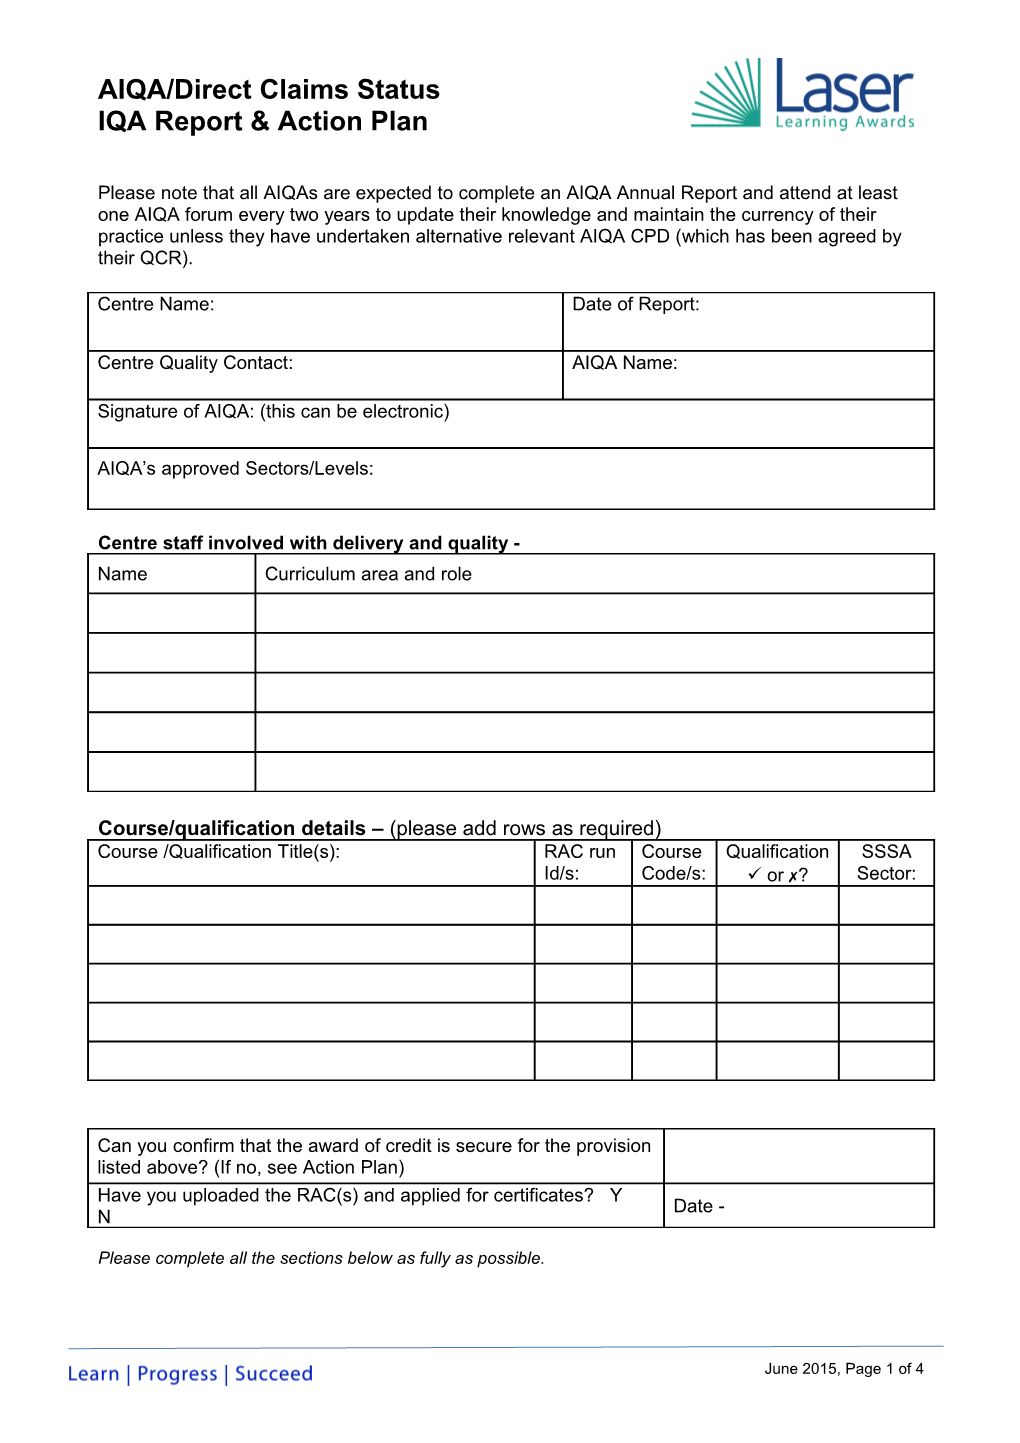 Quality Review Feedback for On-Course Visit (QR1) Form